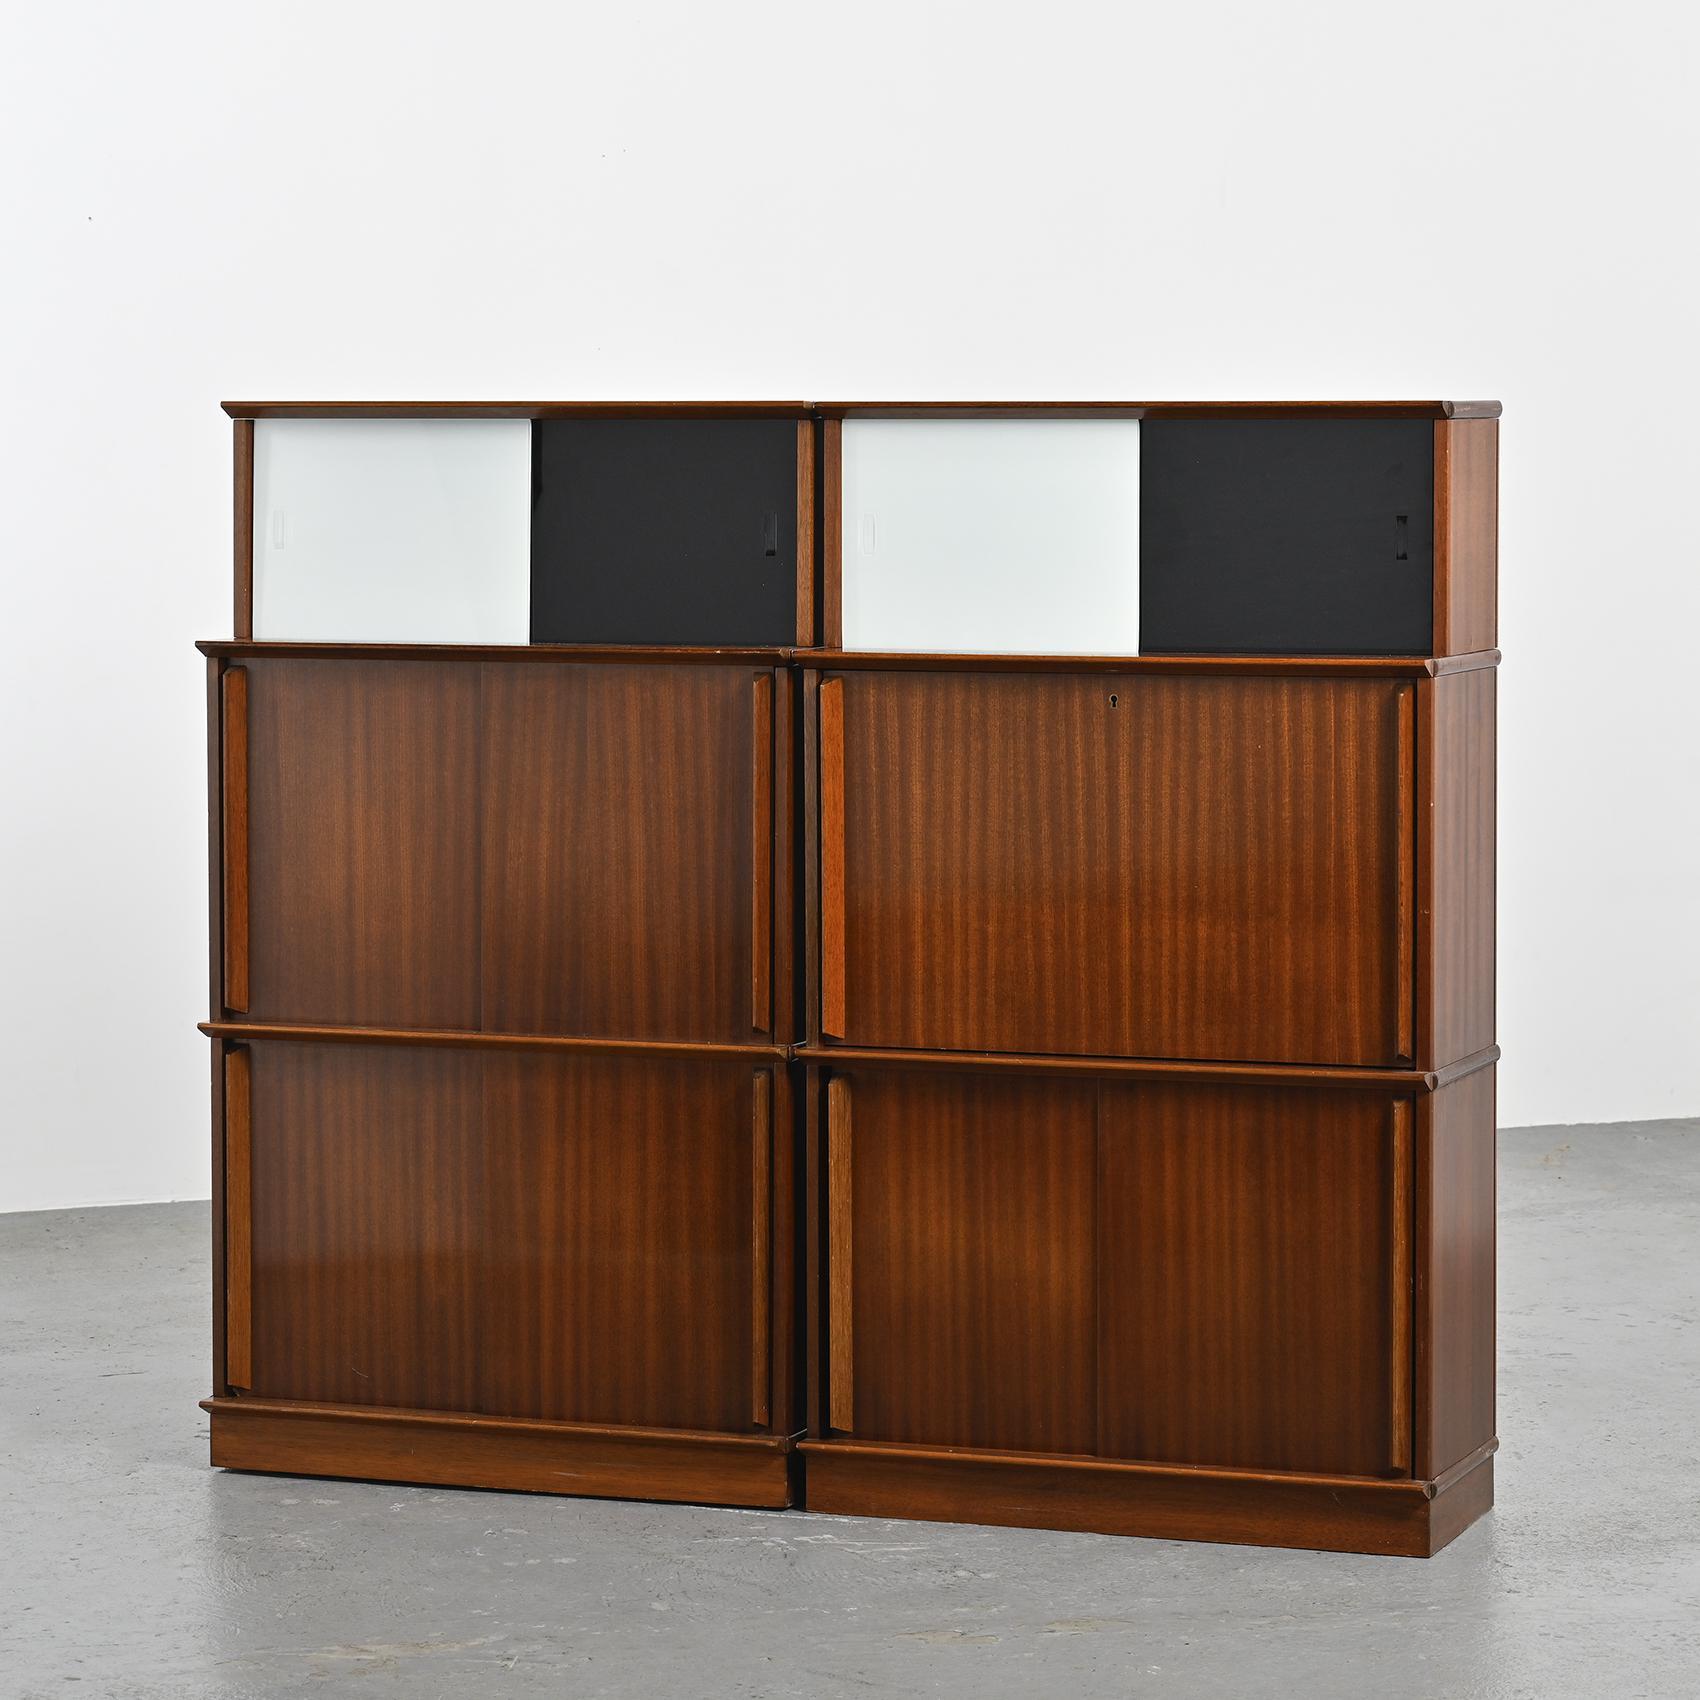 Pair of bookcases dating from the 1950s, by Didier Rozaffy for the French manufacturing company Oscar, known for its modular bookcases and furniture.

During this period, Oscar furniture was innovative, characterized by its adaptability, with